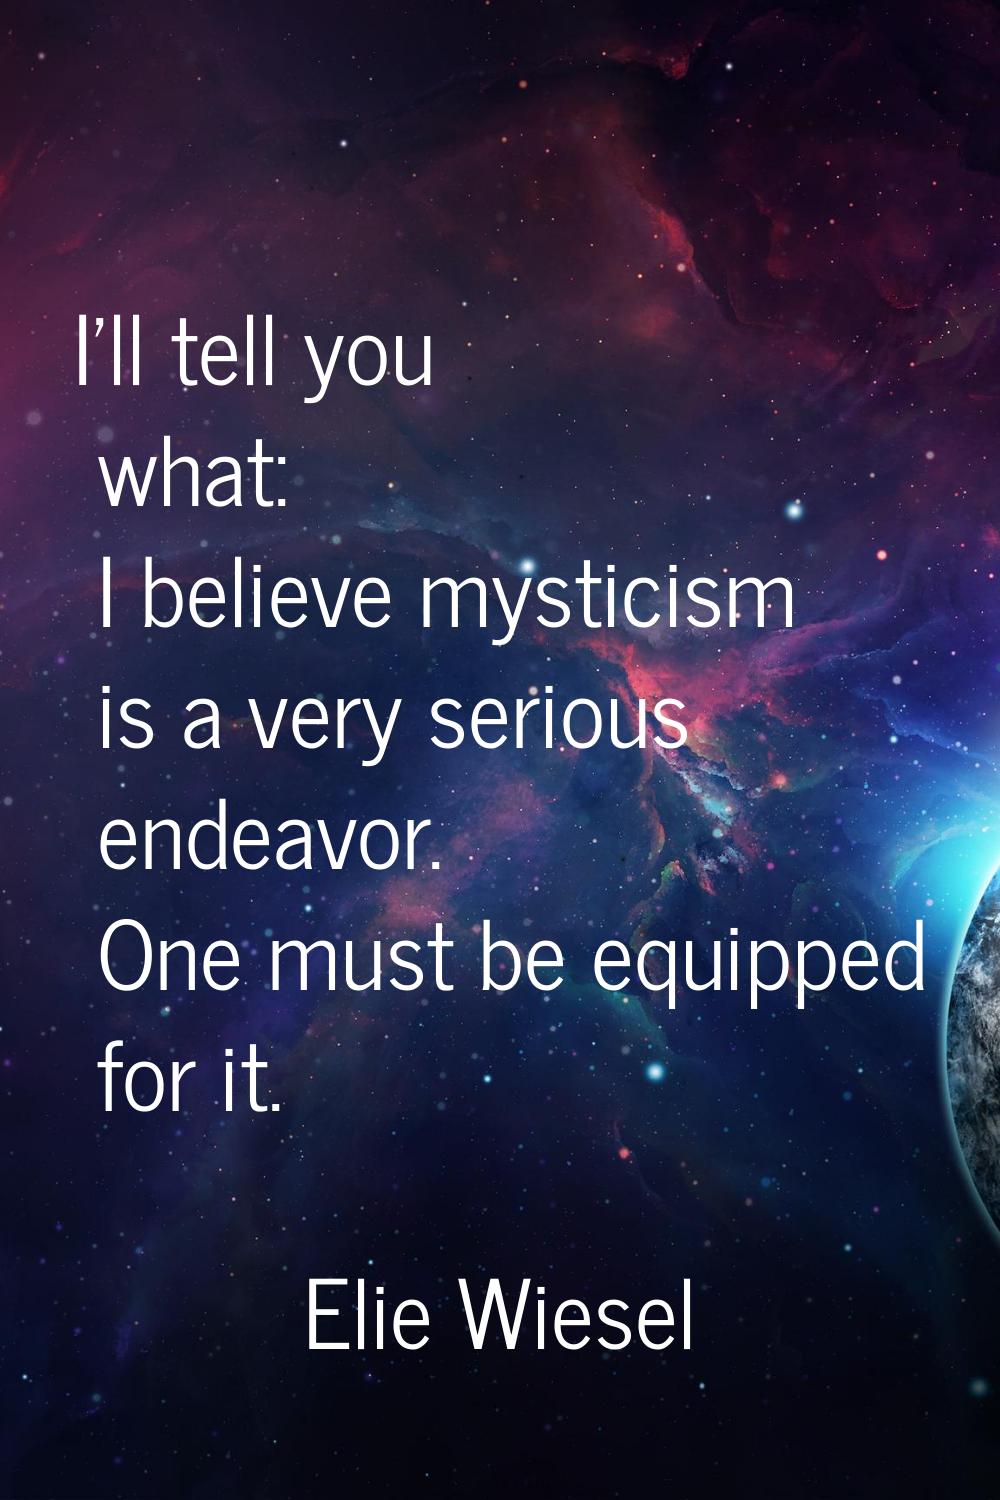 I'll tell you what: I believe mysticism is a very serious endeavor. One must be equipped for it.